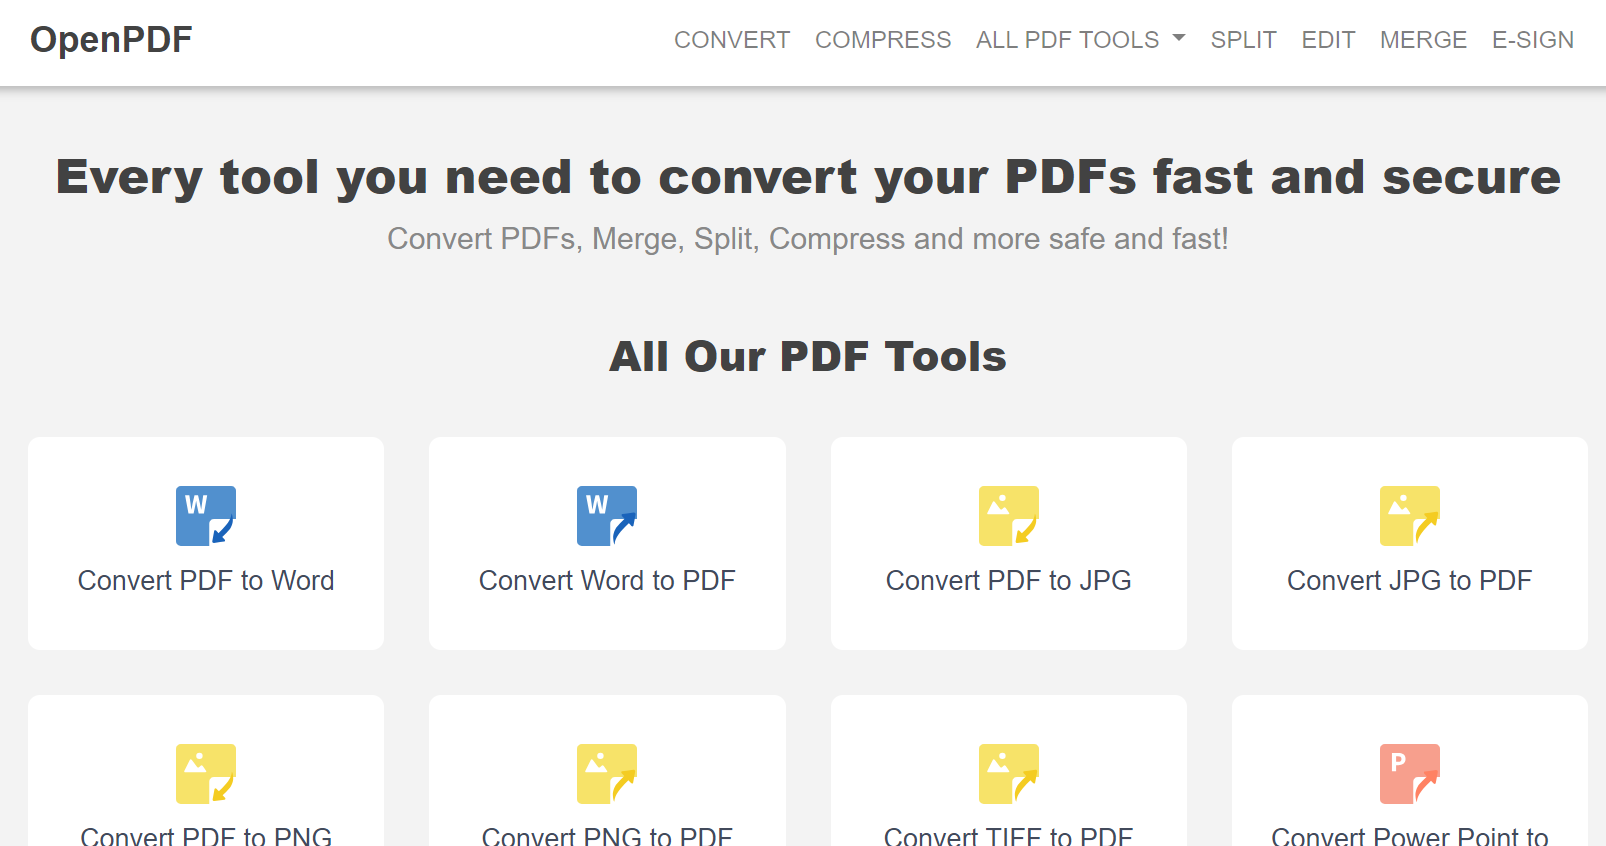 Say Goodbye to Tedious Edits: Edit PDFs in a Flash with OpenPDF’s Online Editing Tools